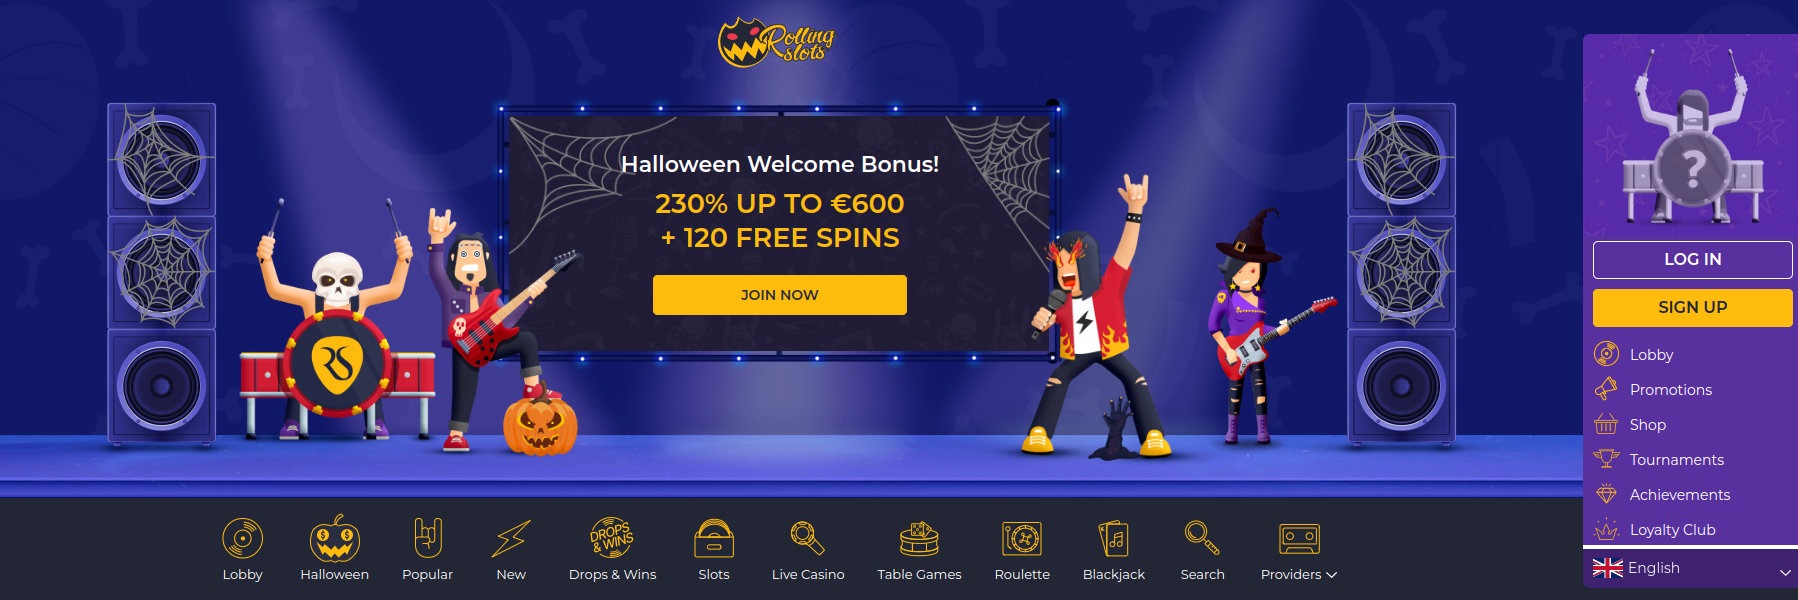 17 Tricks About newesr casino sites You Wish You Knew Before